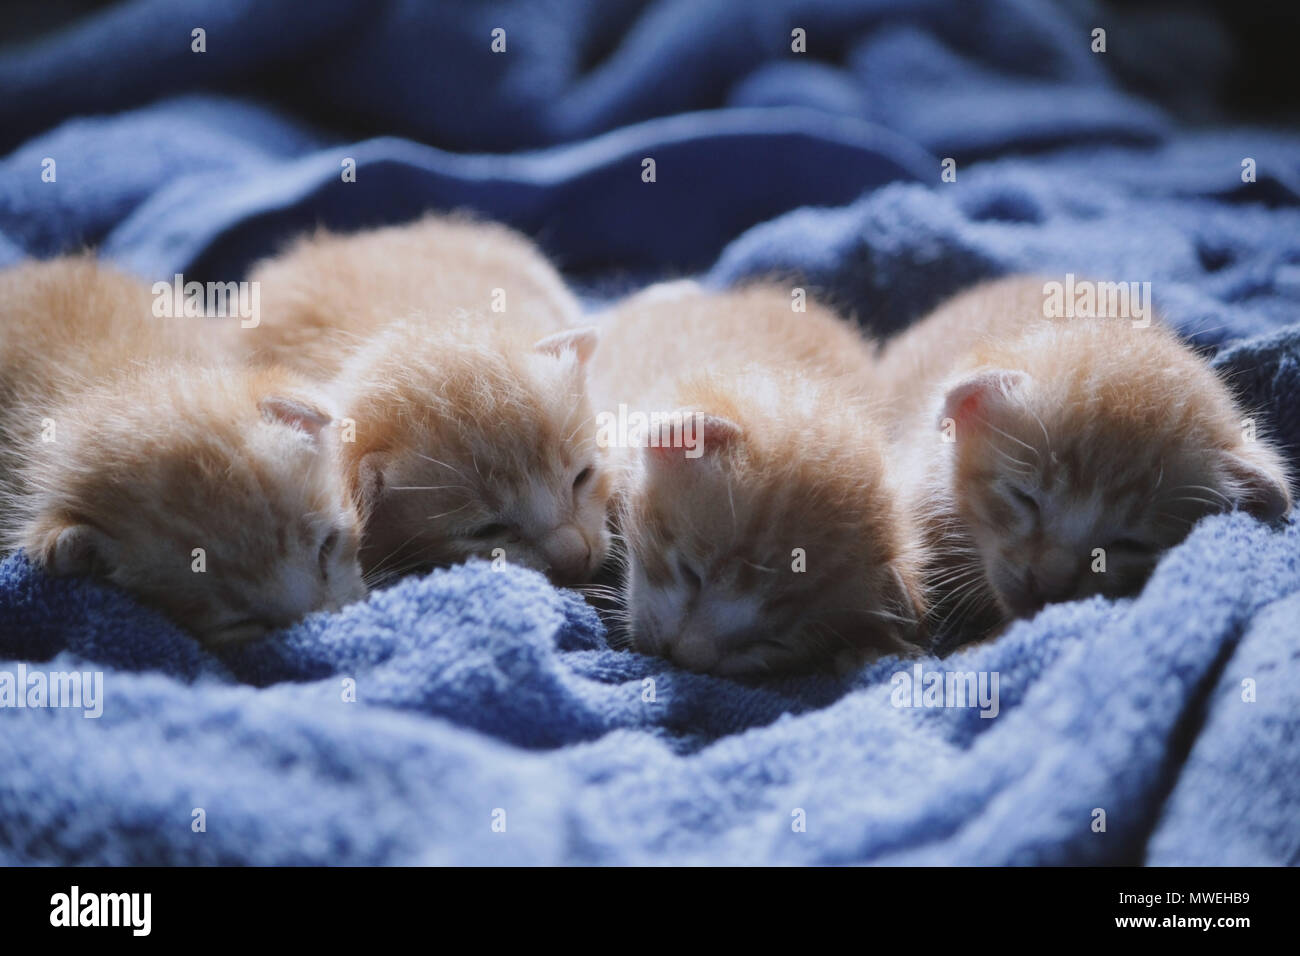 This picture was taken right after me and my friends found them. The mother ran away from us so we only photographed the kittens. Stock Photo